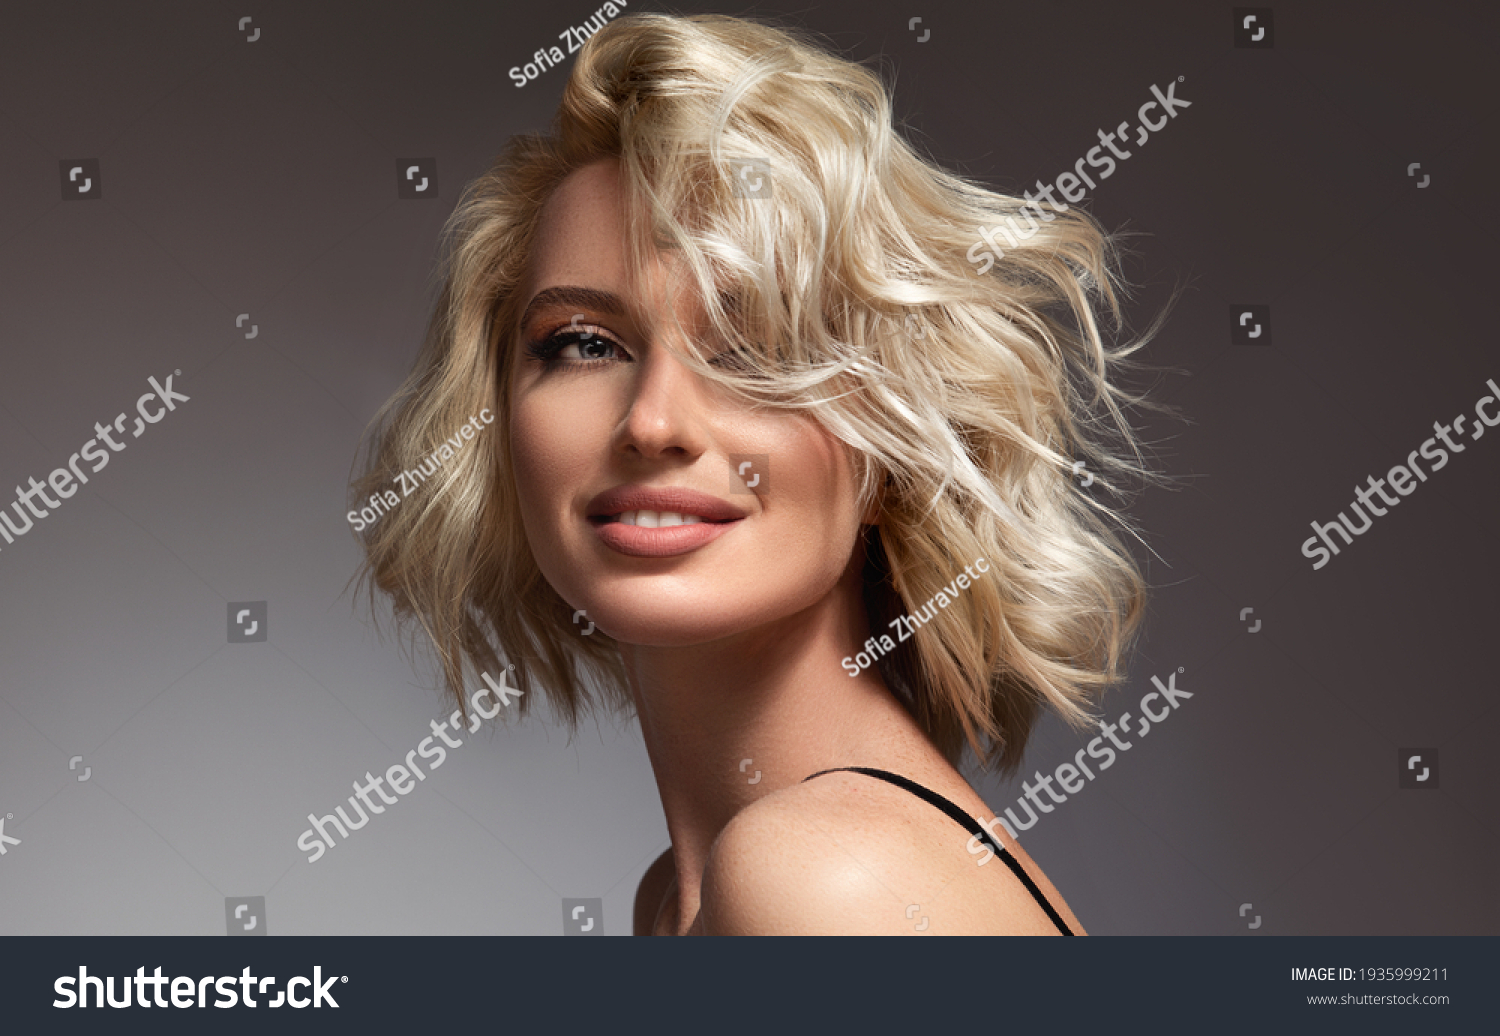 Beautiful model girl with short hair .Beauty  smiling woman with blonde curly hairstyle dye .Fashion, cosmetics and makeup #1935999211